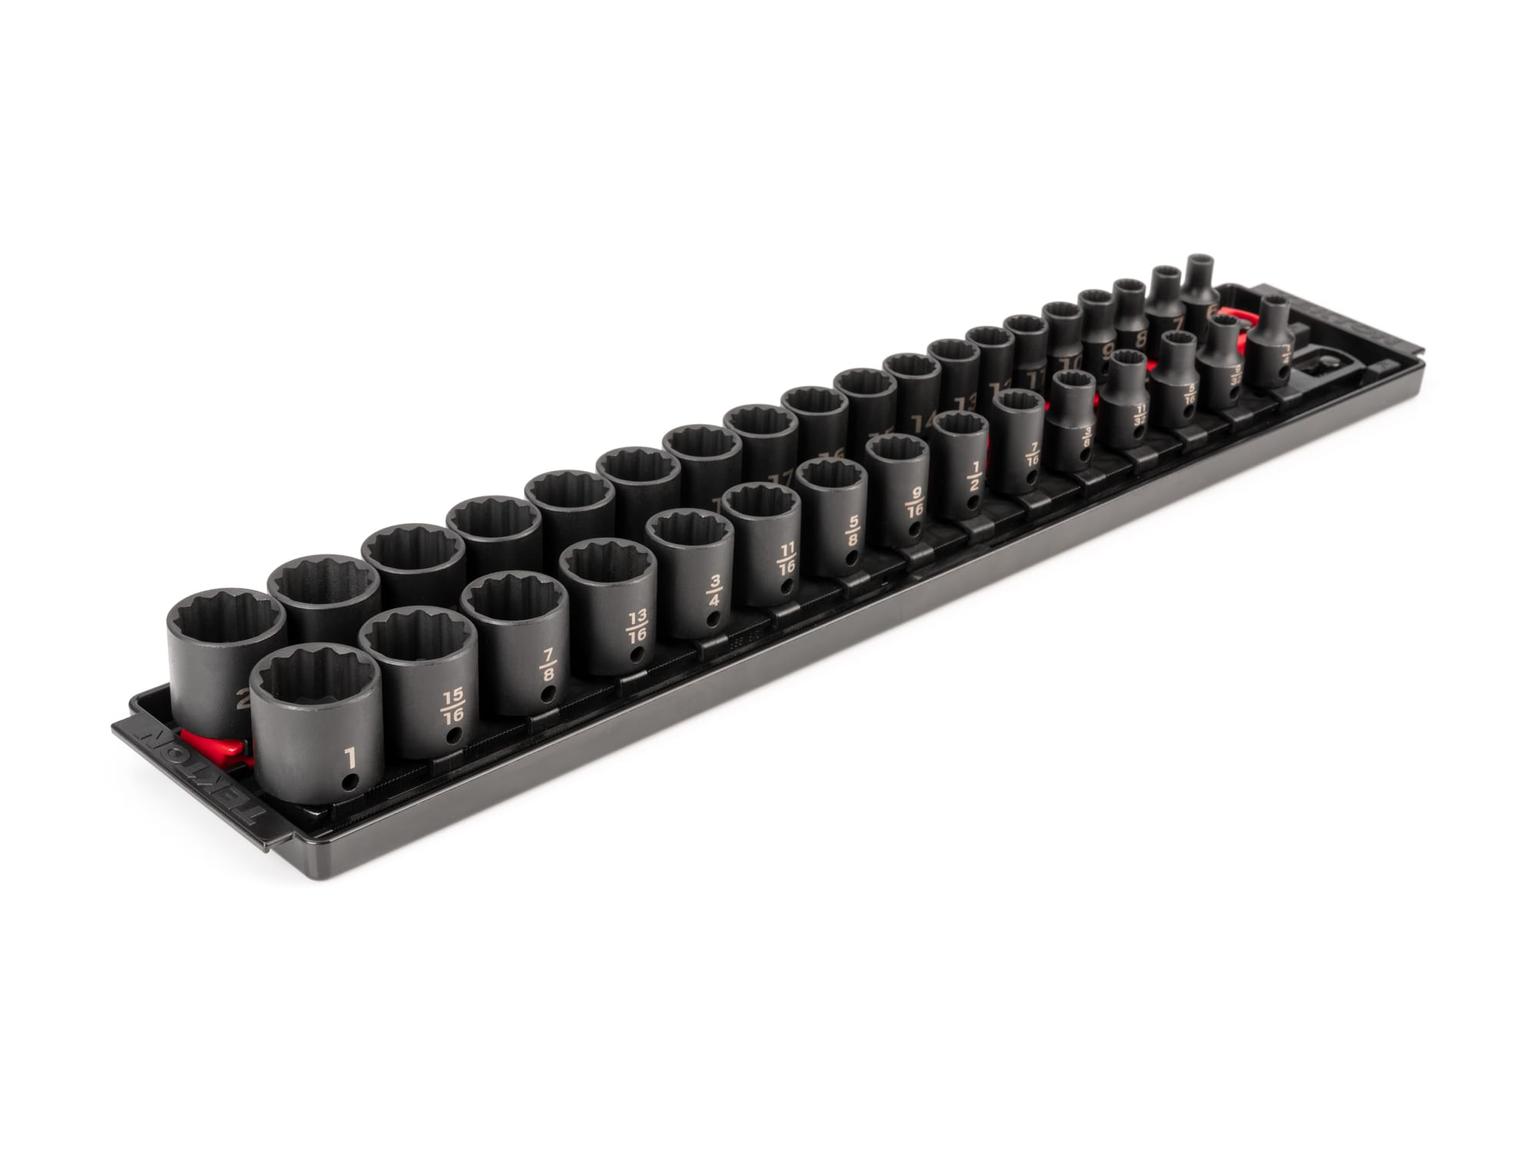 TEKTON SID91206-T 3/8 Inch Drive 12-Point Impact Socket Set, 34-Piece (1/4-1 in., 6-24 mm) with Rails